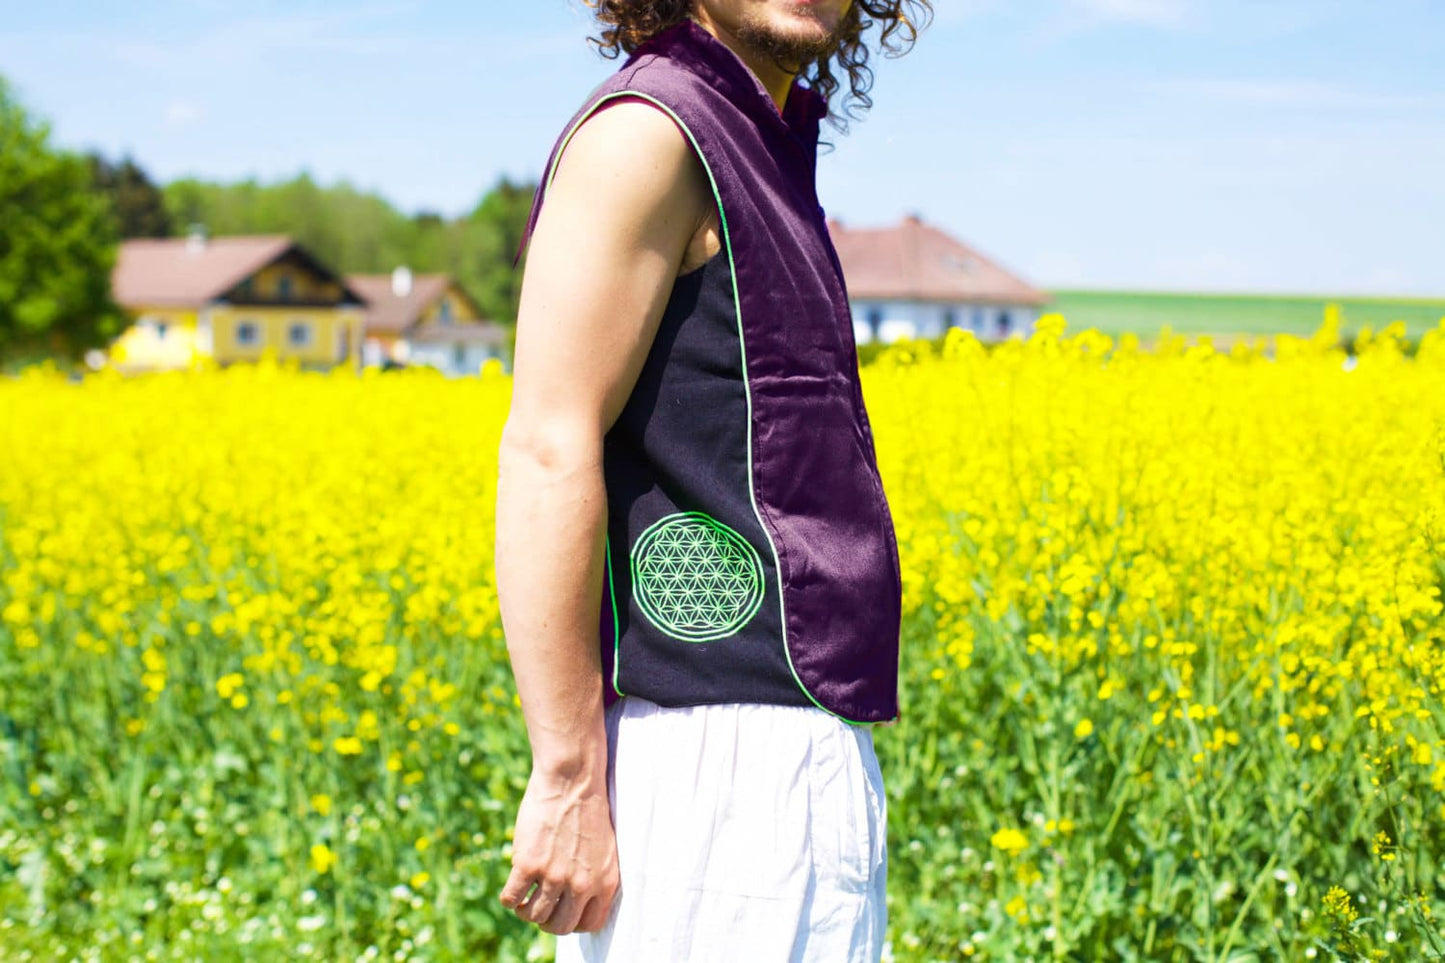 milk hill rainbow fractal crop circle - Design your jacket in any colours -handmade in your size blacklight active 1 zip lock inside pocket